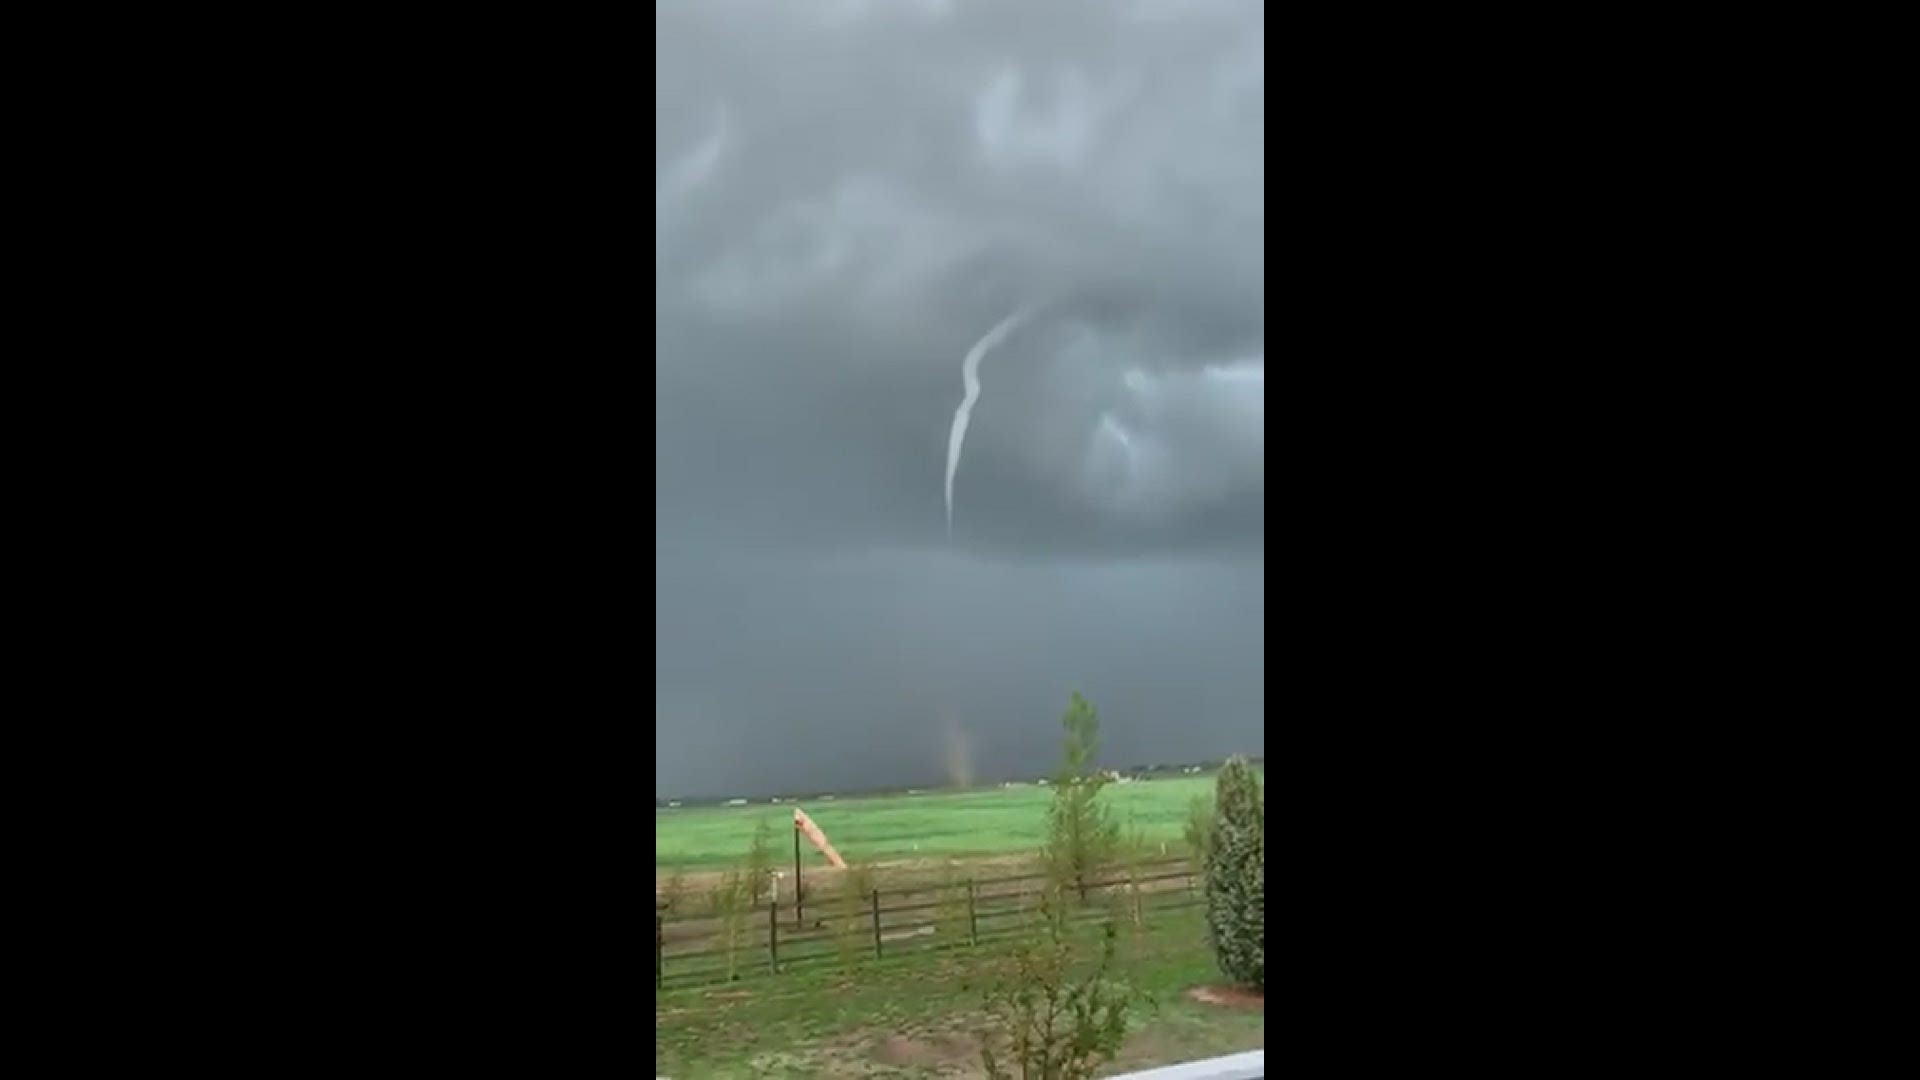 Tim and Connie Sloan captured this video of a tornado near Bennett, Colorado, on May 23, 2021.